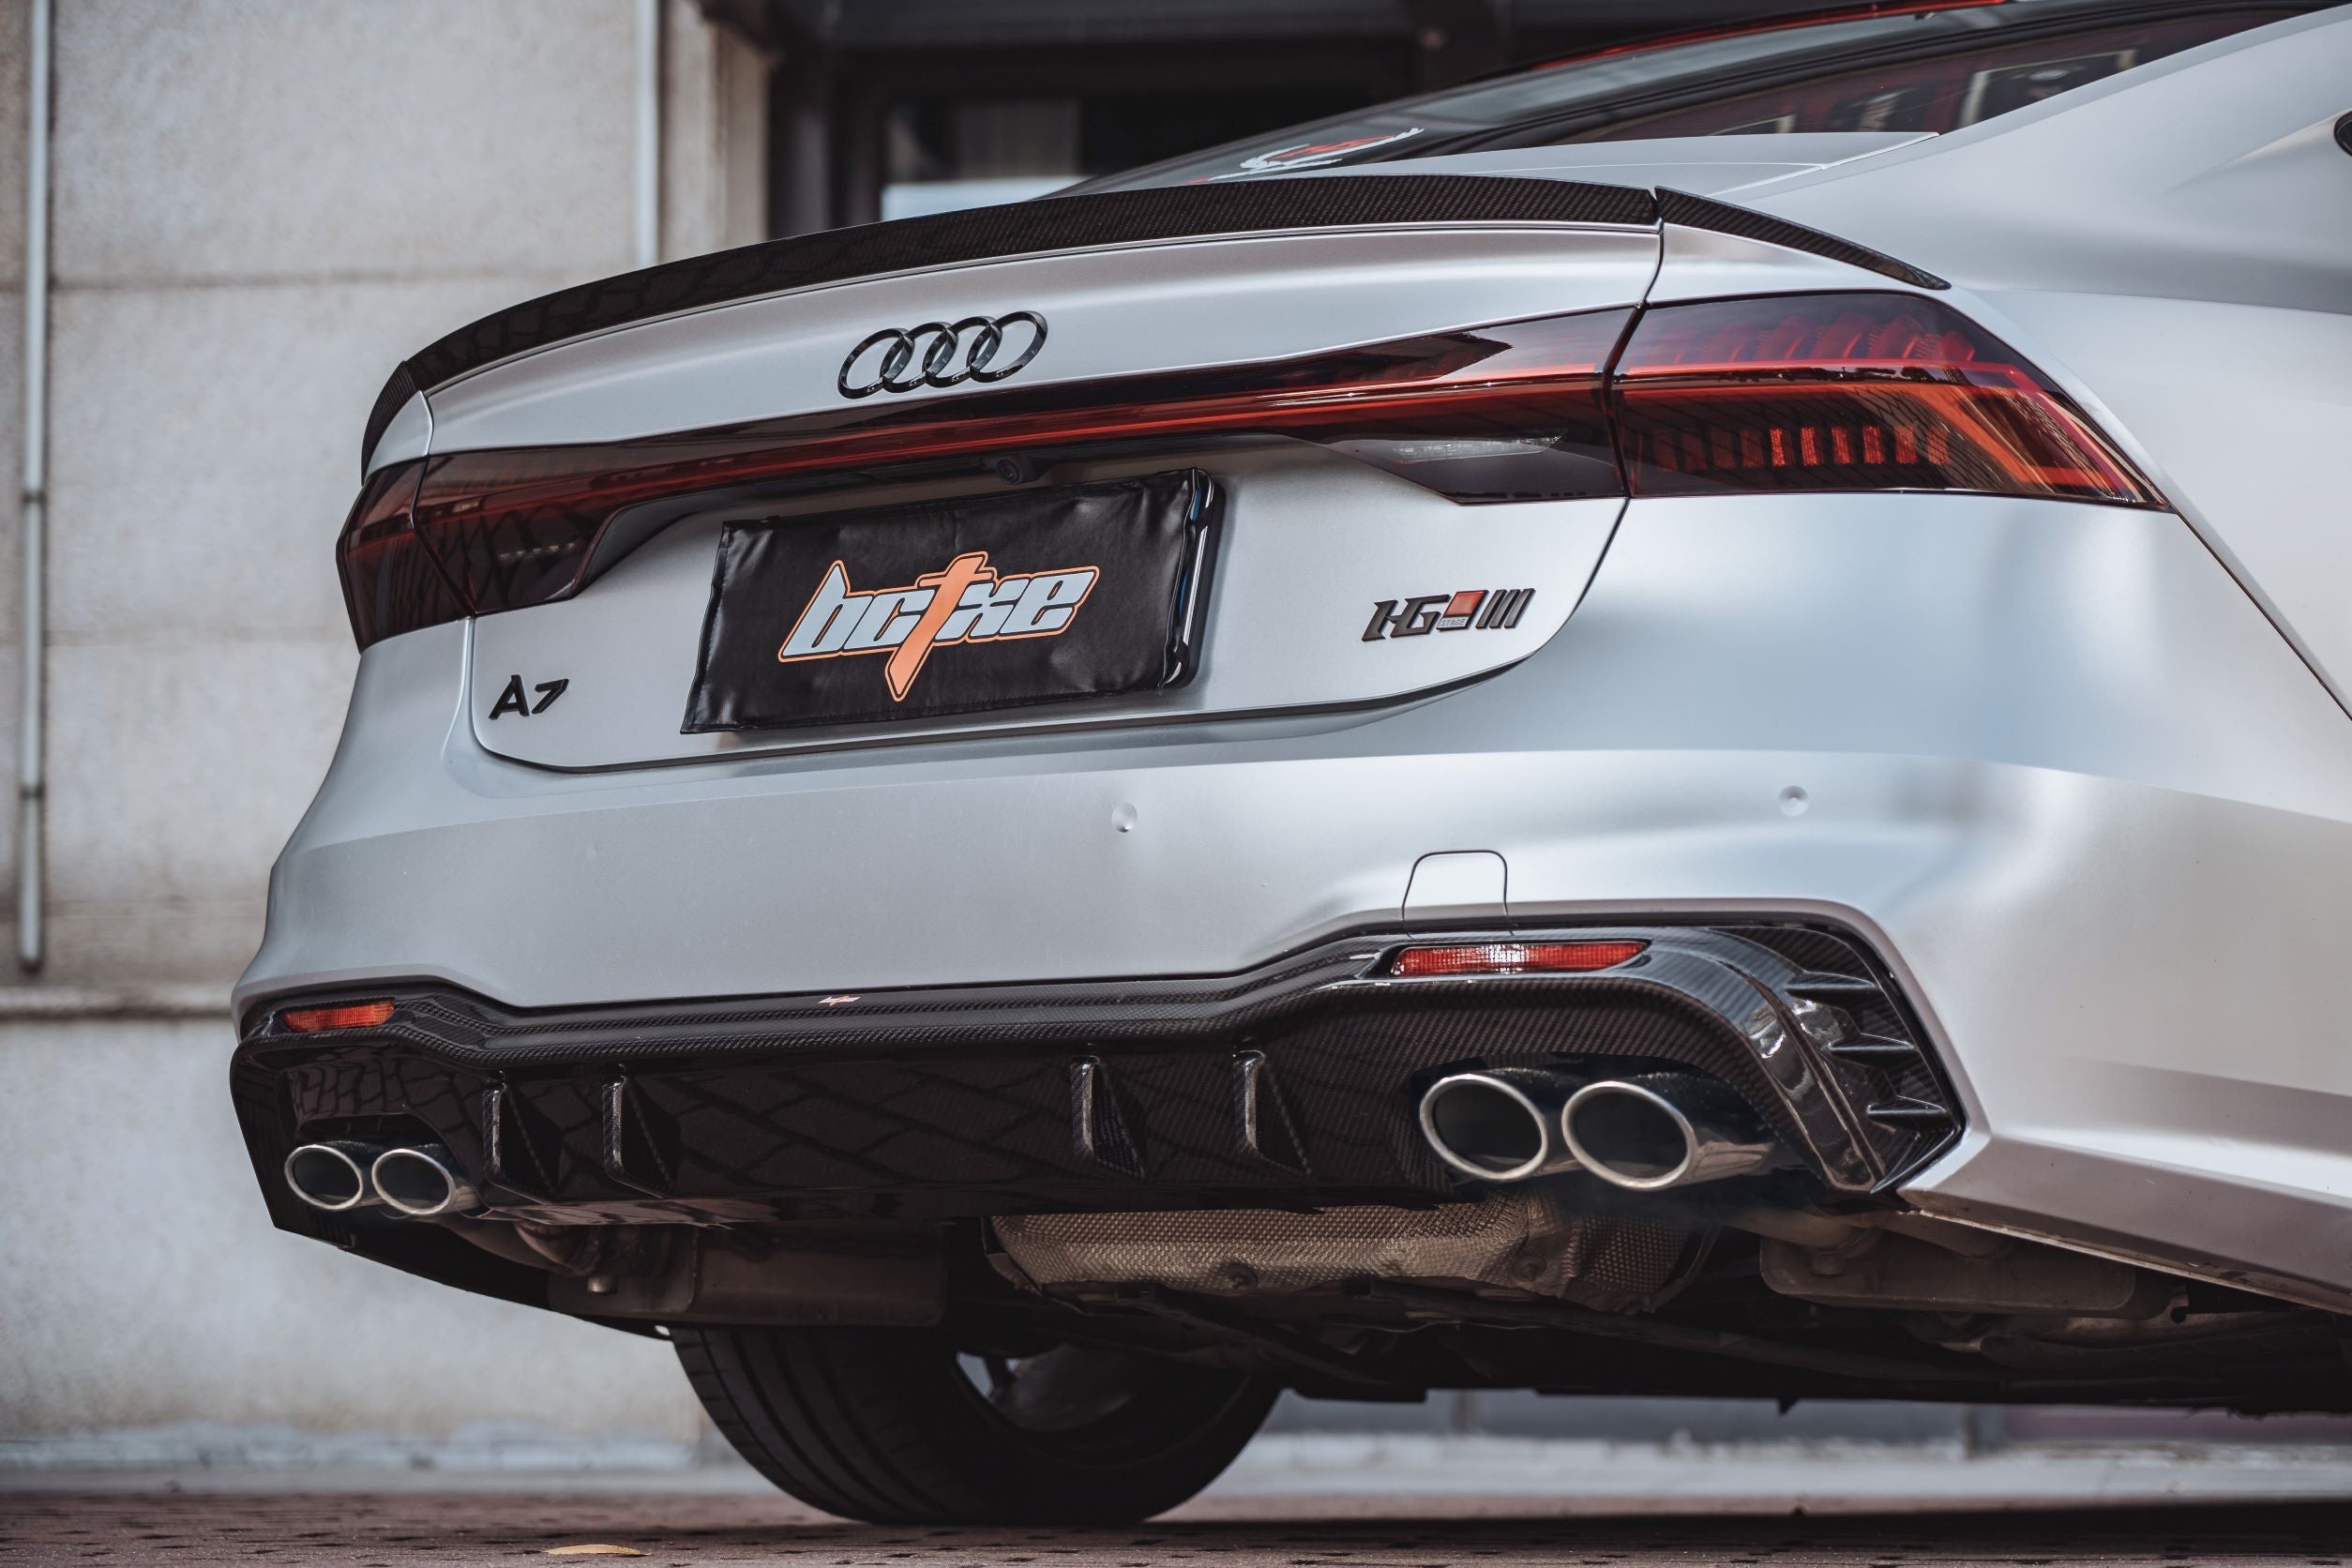 BCTXE Tuning Carbon Fiber Rear Diffuser Ver.1 for Audi S7 & A7 S Line 2019-ON C8